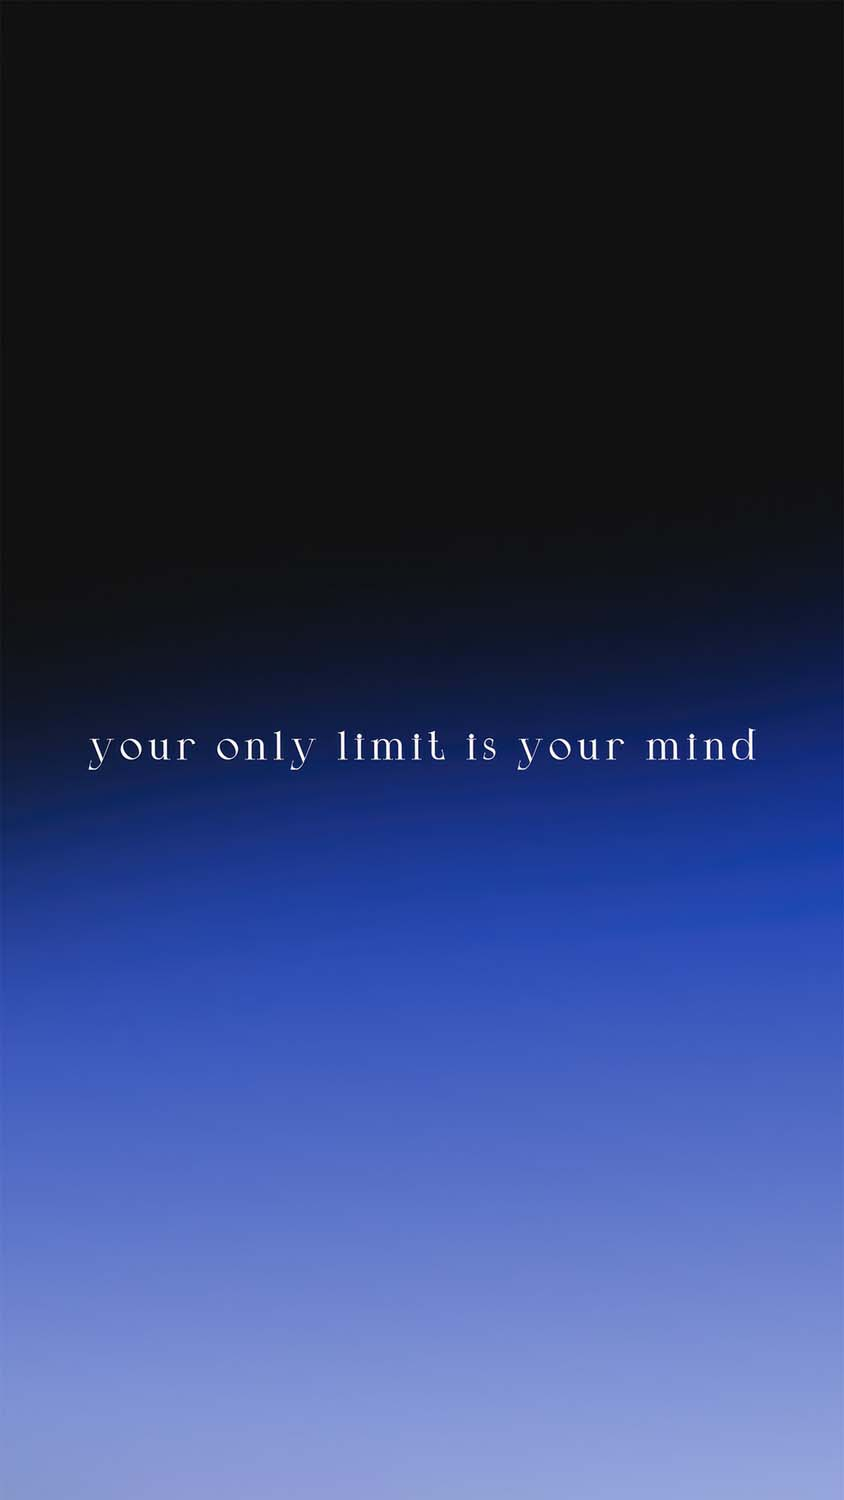 Your only limit is your Mind iPhone Wallpaper 4K  iPhone Wallpapers